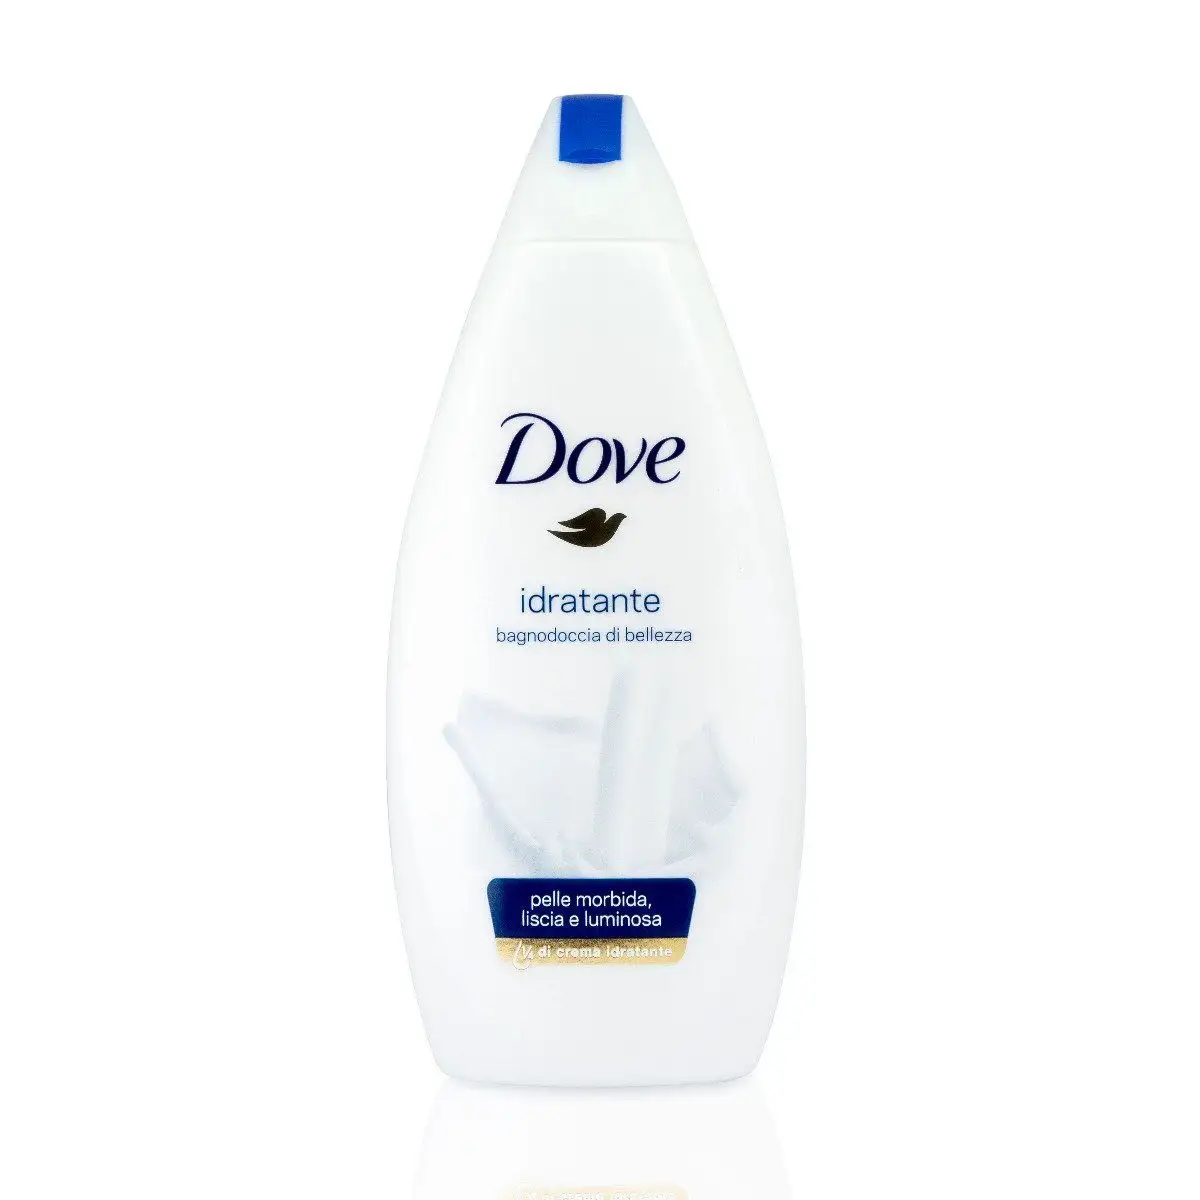 High Quality Doves Body Wash Deeply nourishing 1L wholesale supplier doves shower gel Cheap Price